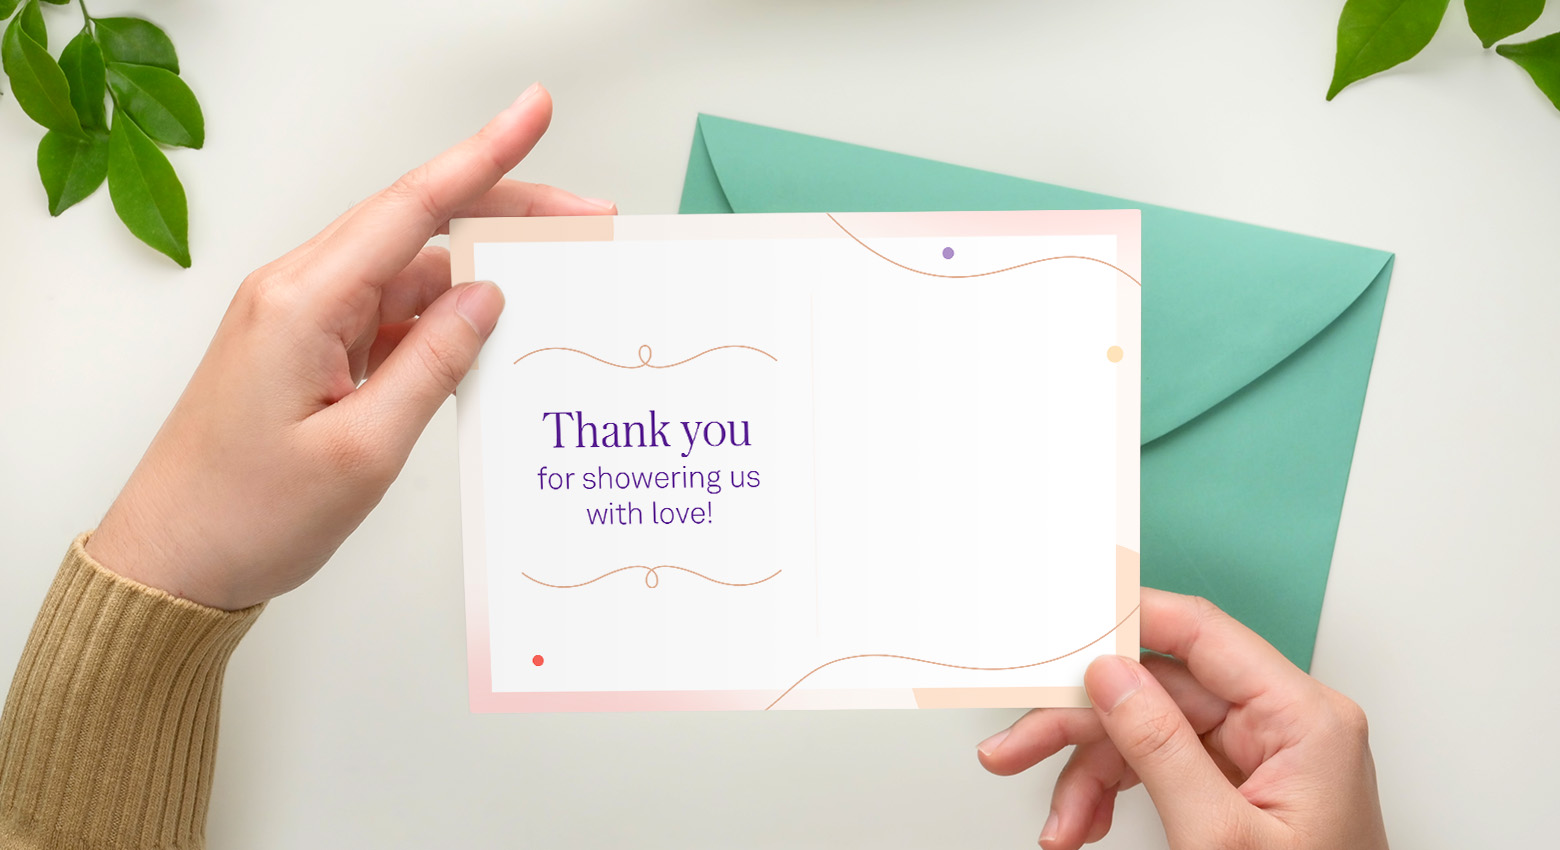 Two hands hold a printable thank you card open and it says "Thank you for showering us with love"